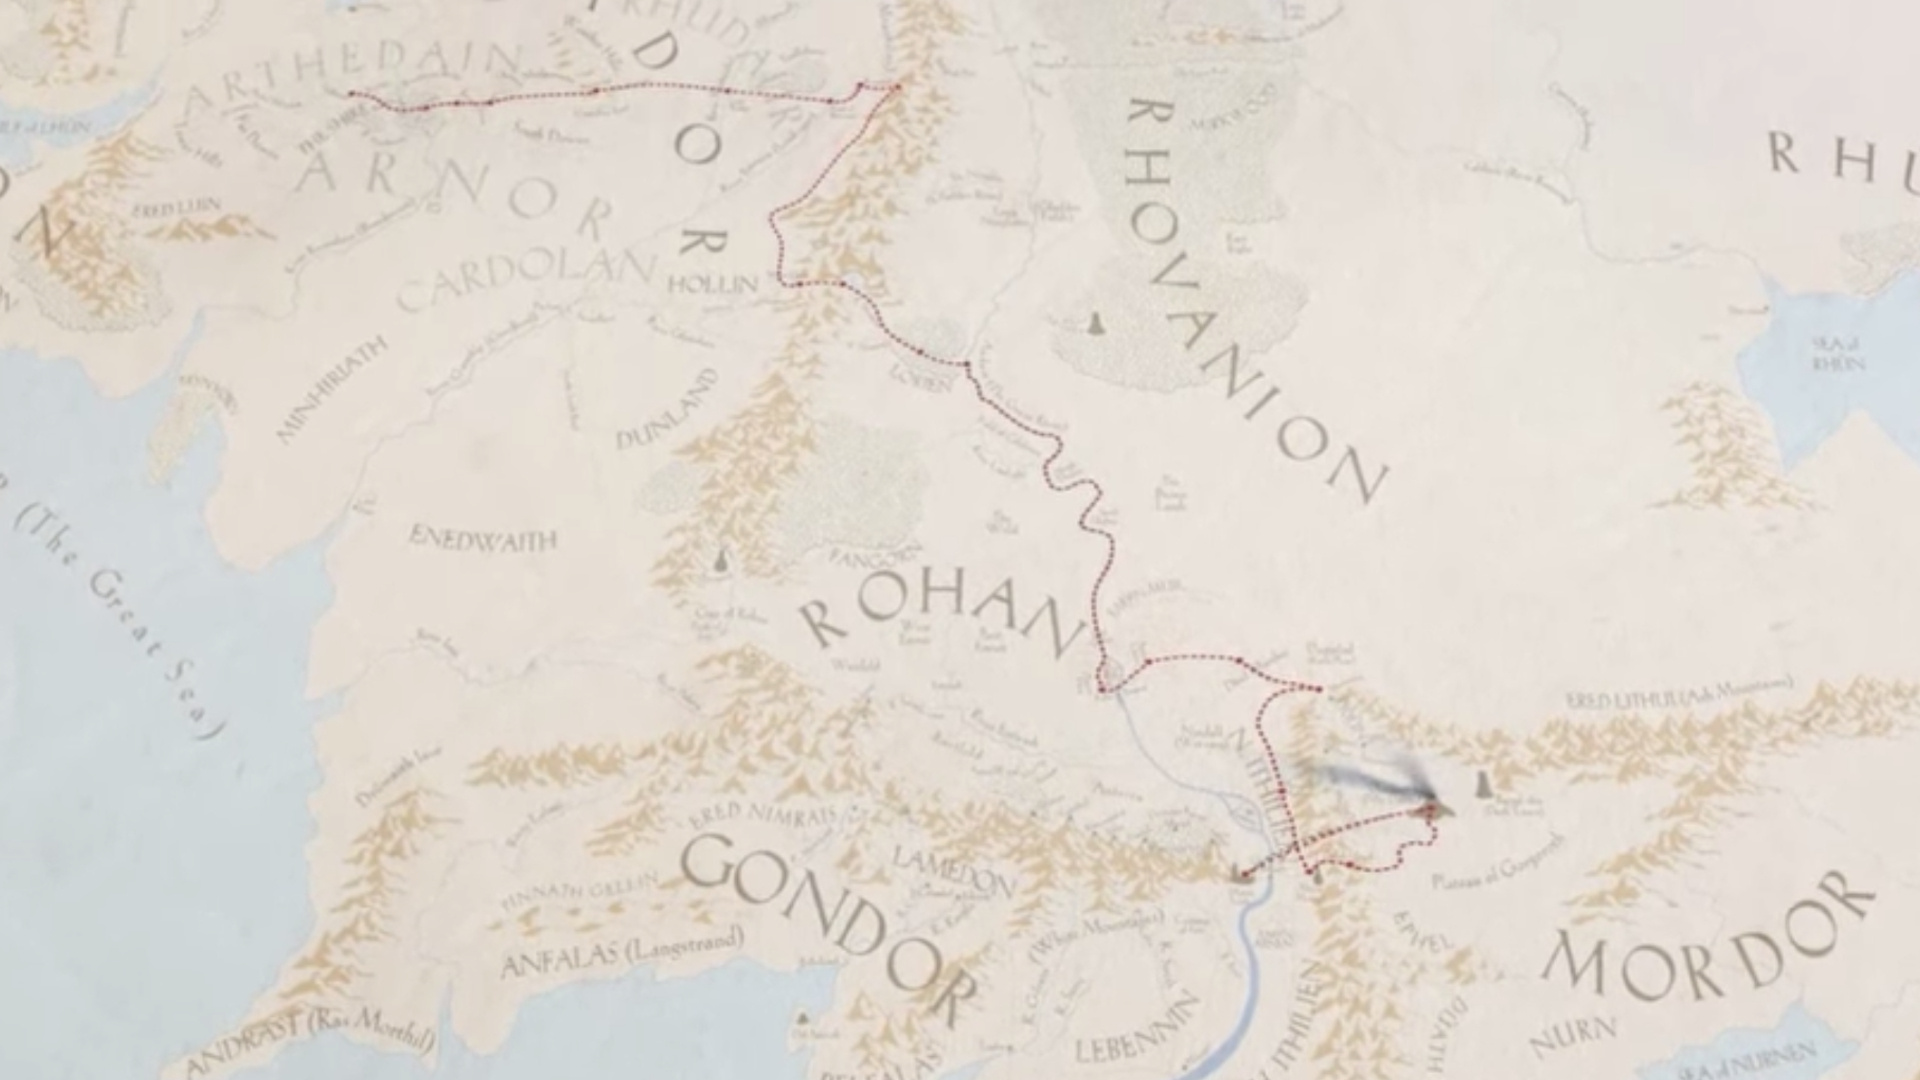 how long was frodo's journey distance